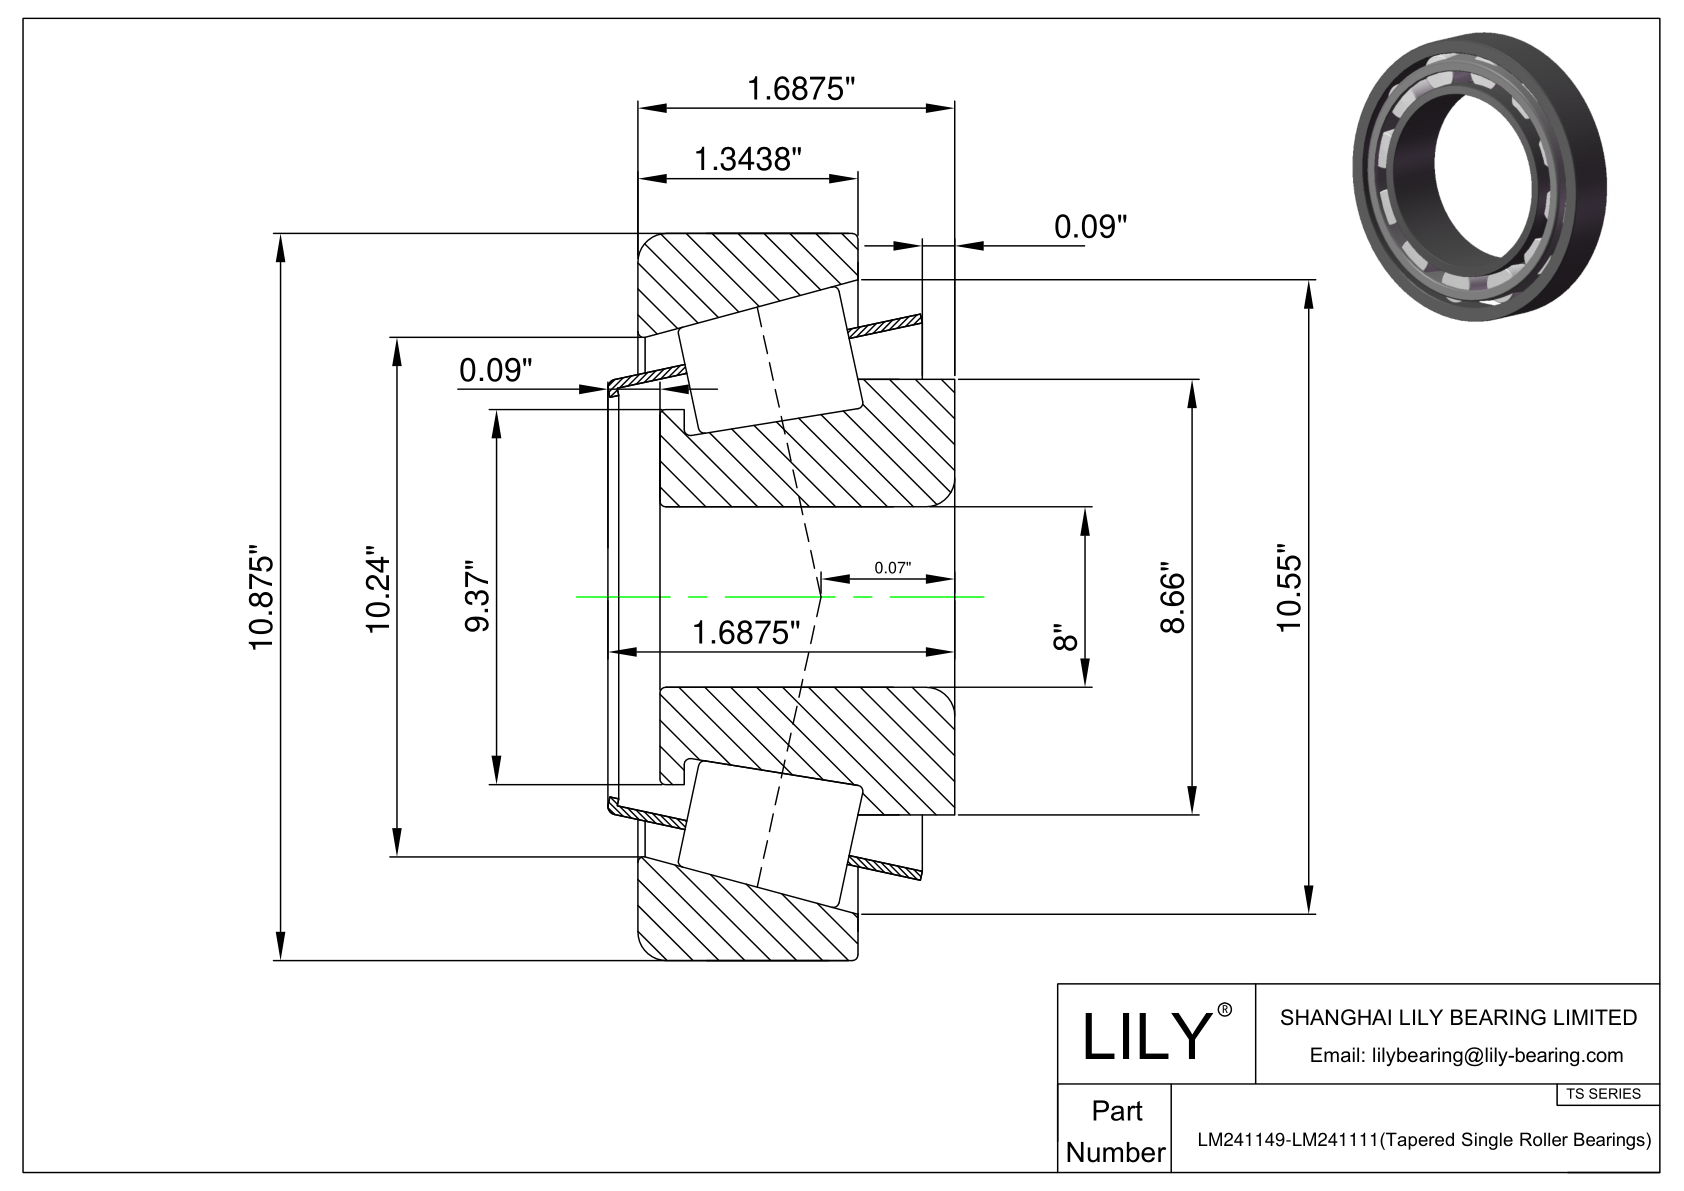 LM241149-LM241111 TS (Tapered Single Roller Bearings) (Imperial) cad drawing